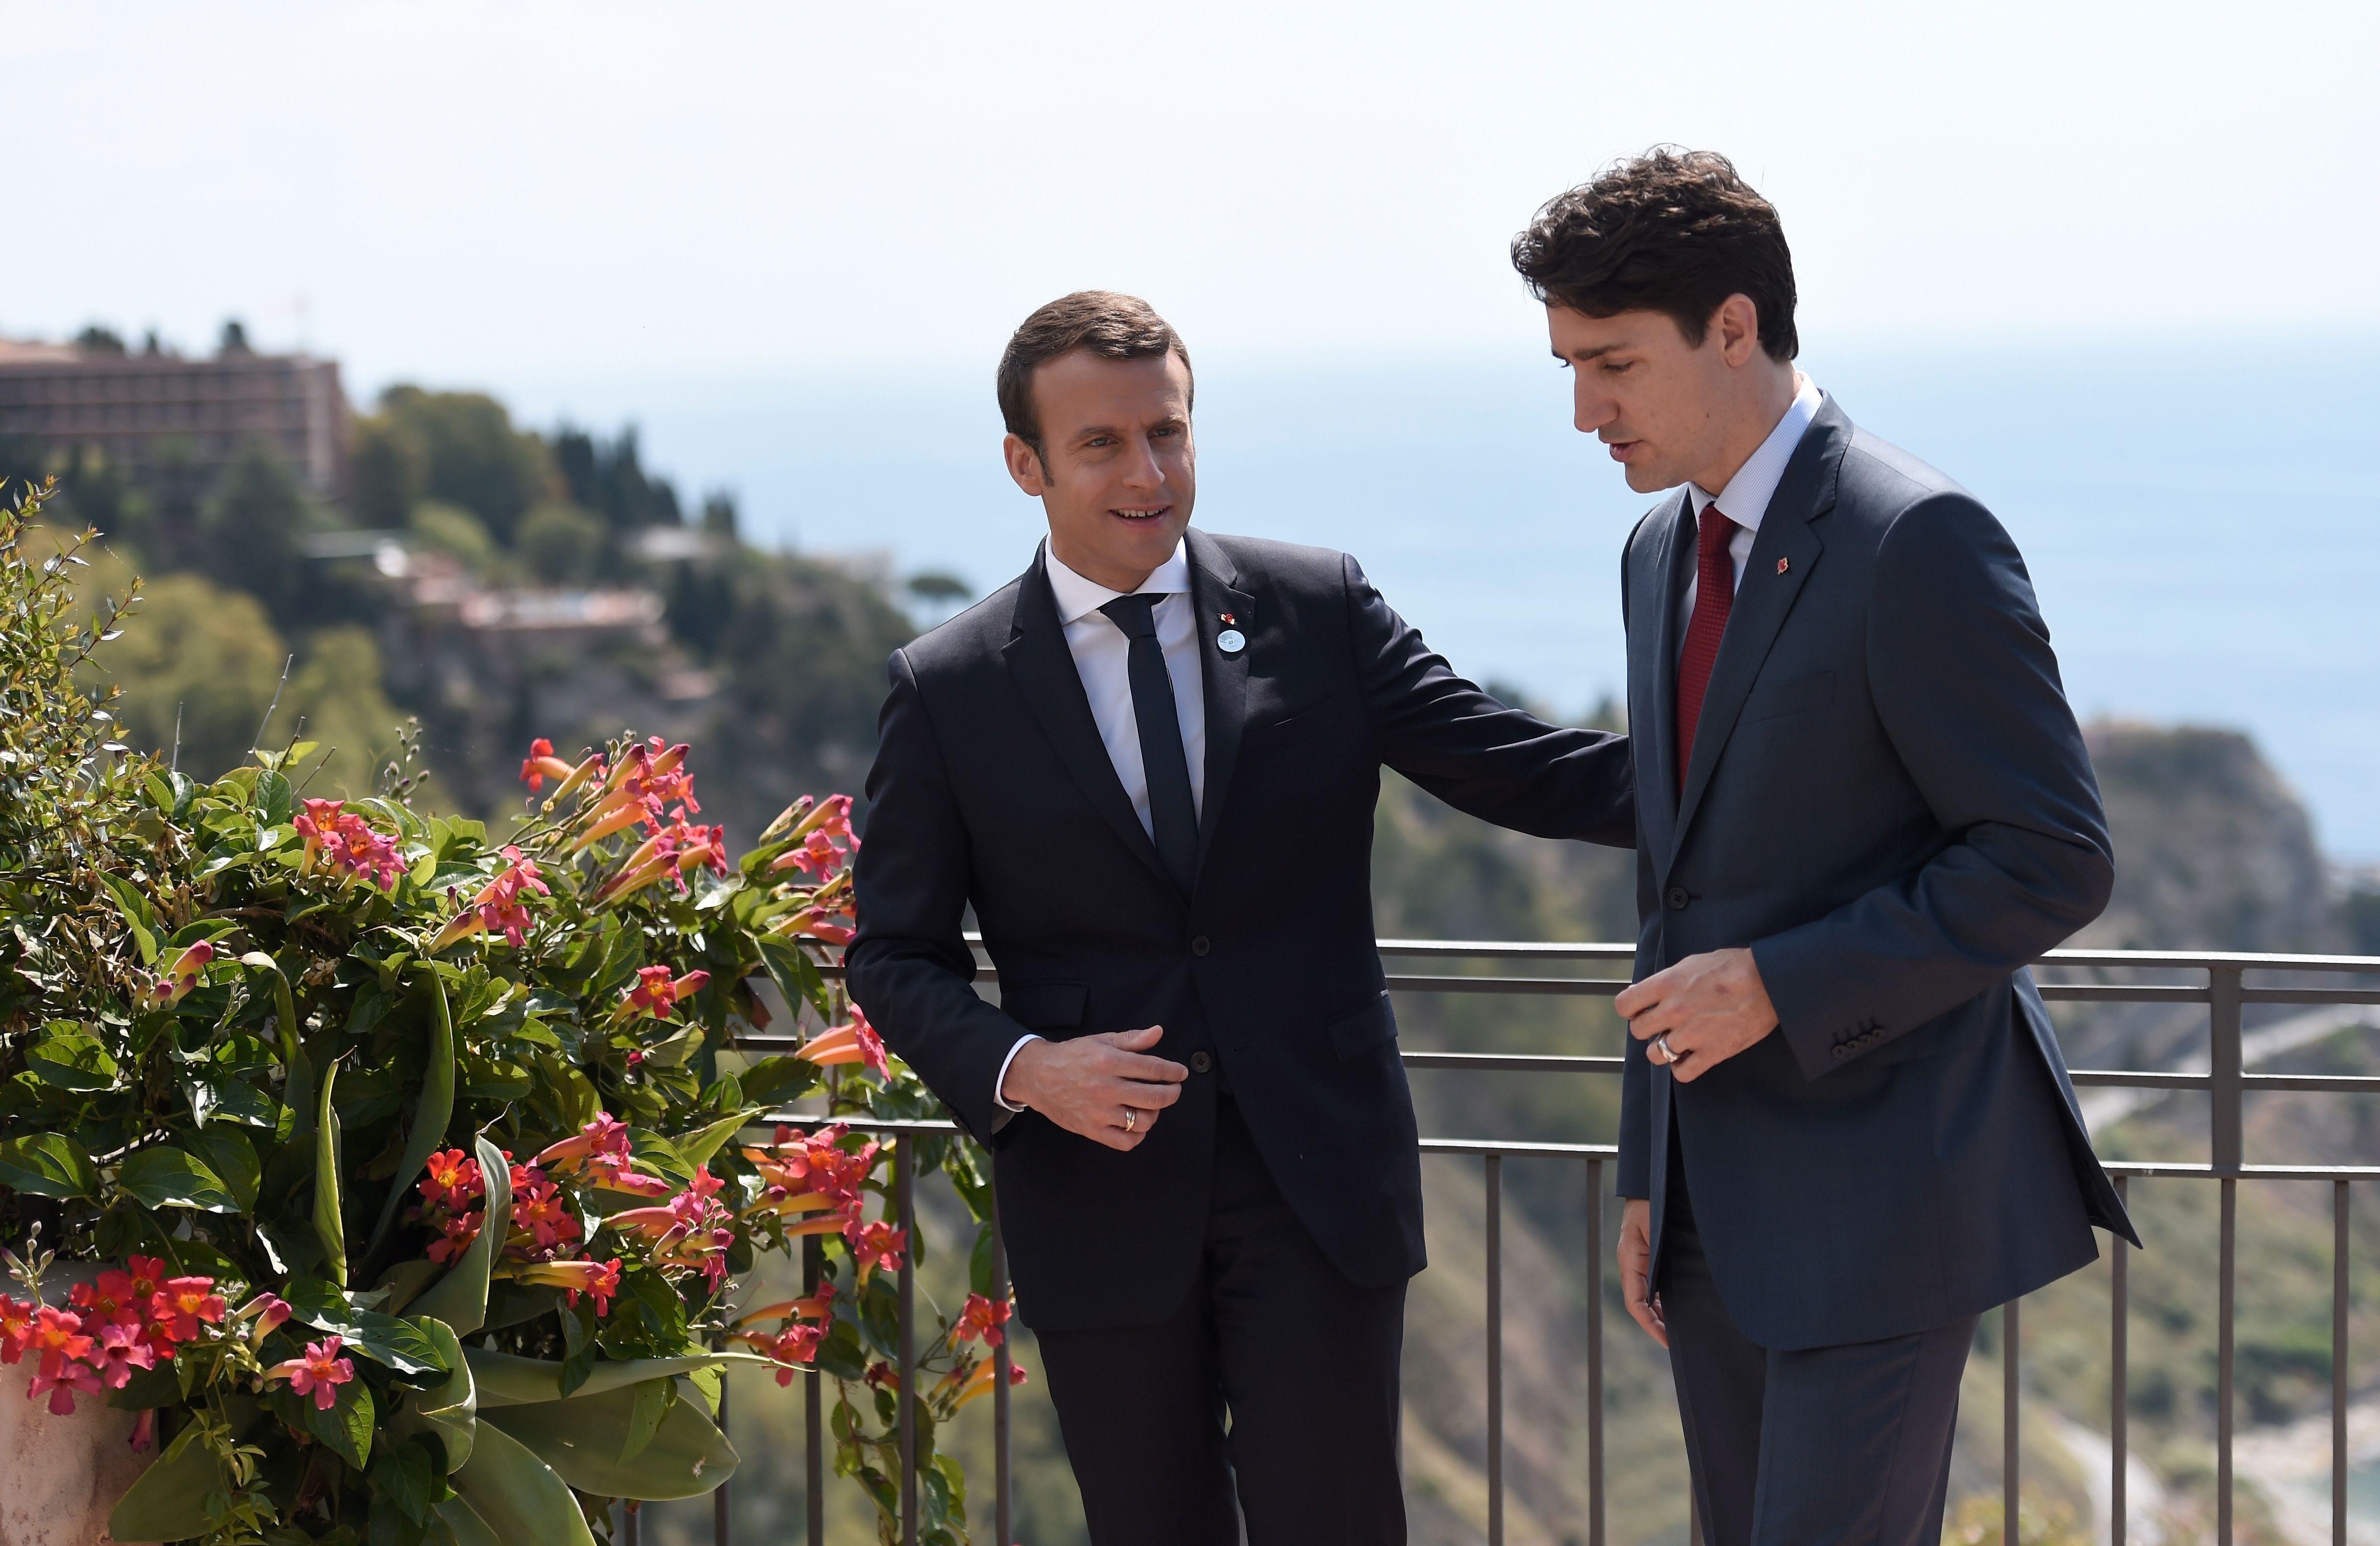 Justin Trudeau and Emmanuel Macron Took a Bromantic Stroll, and the Internet Is Shipping Them Hard